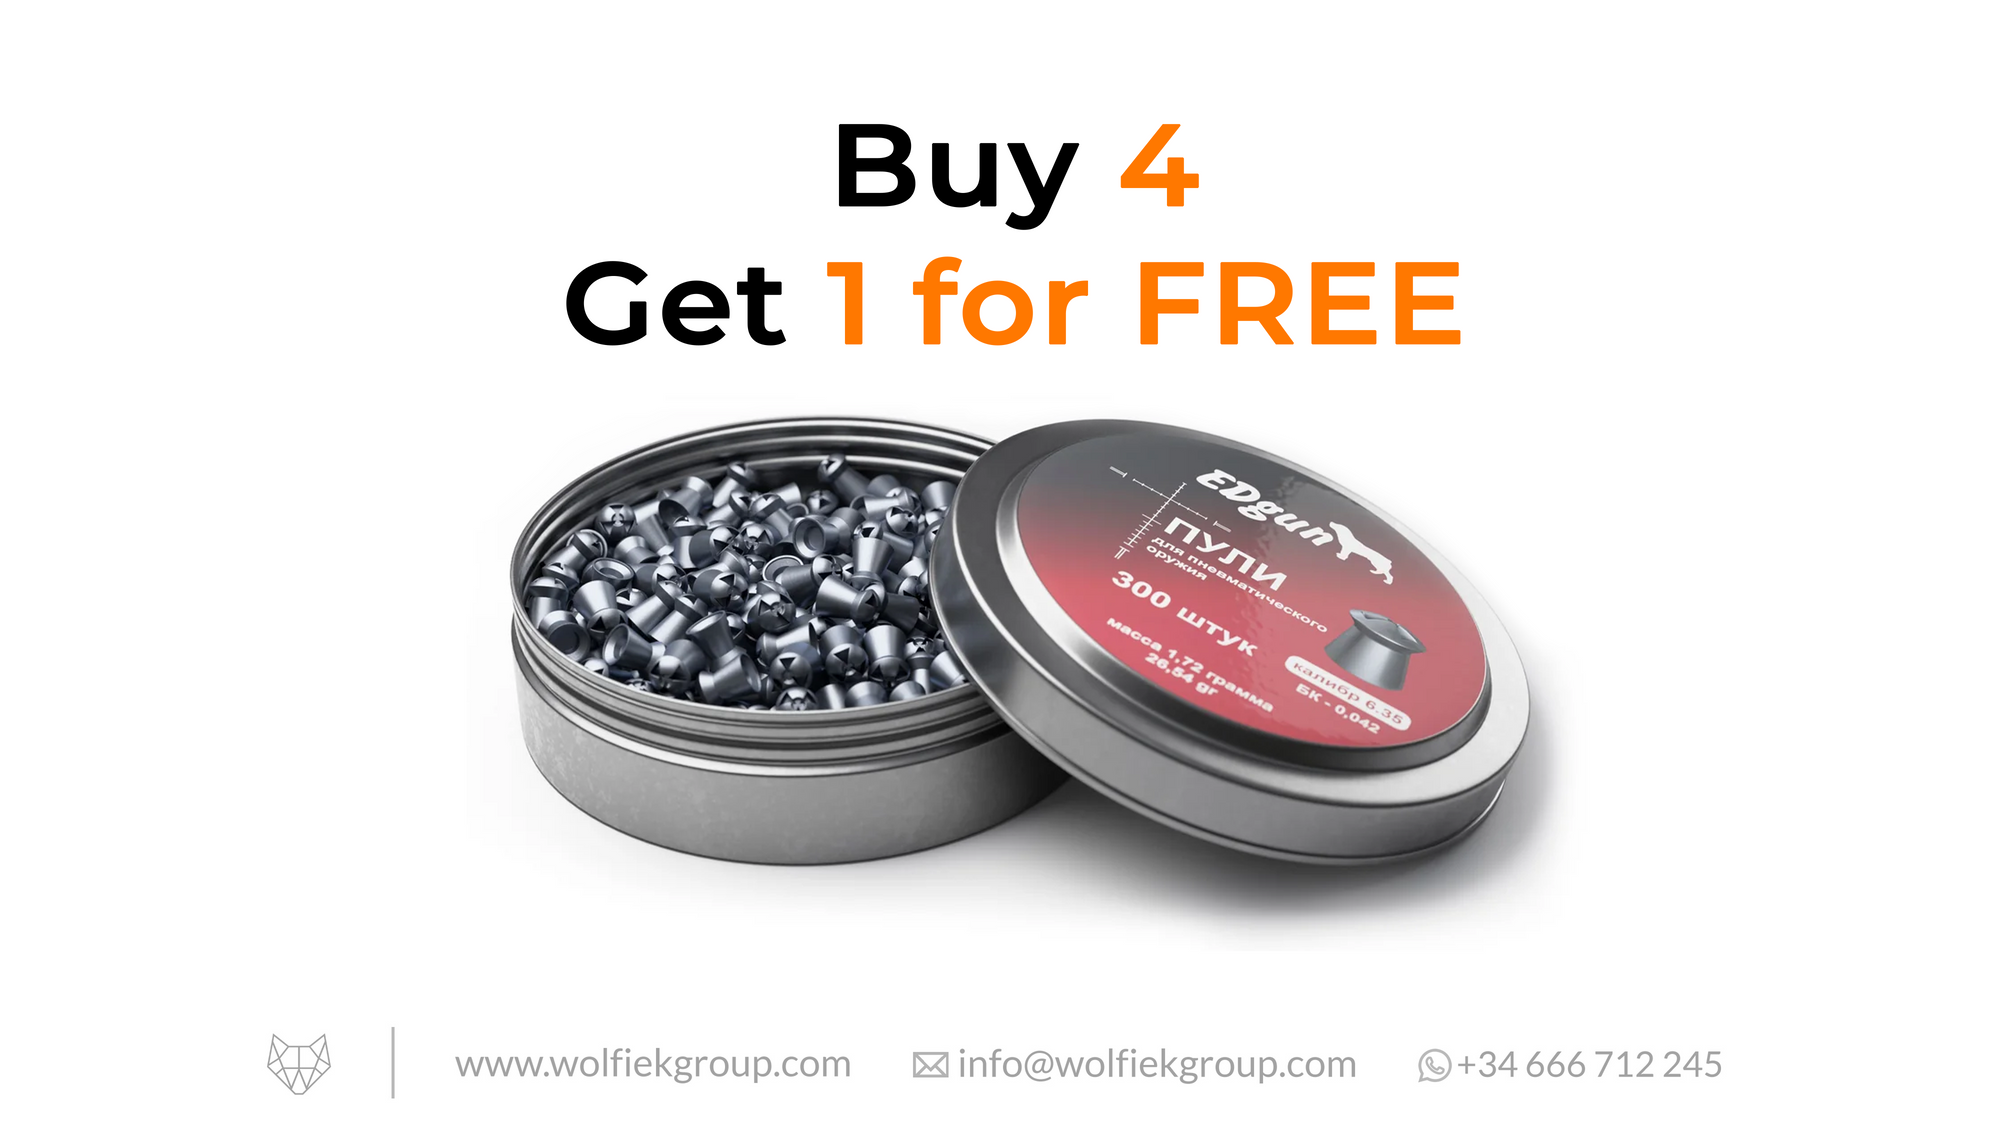 EDgun Hades Pellets Cal .25 (6,35mm) Weight 1,72g (26,54gr) with text buy 4 get 1 for free